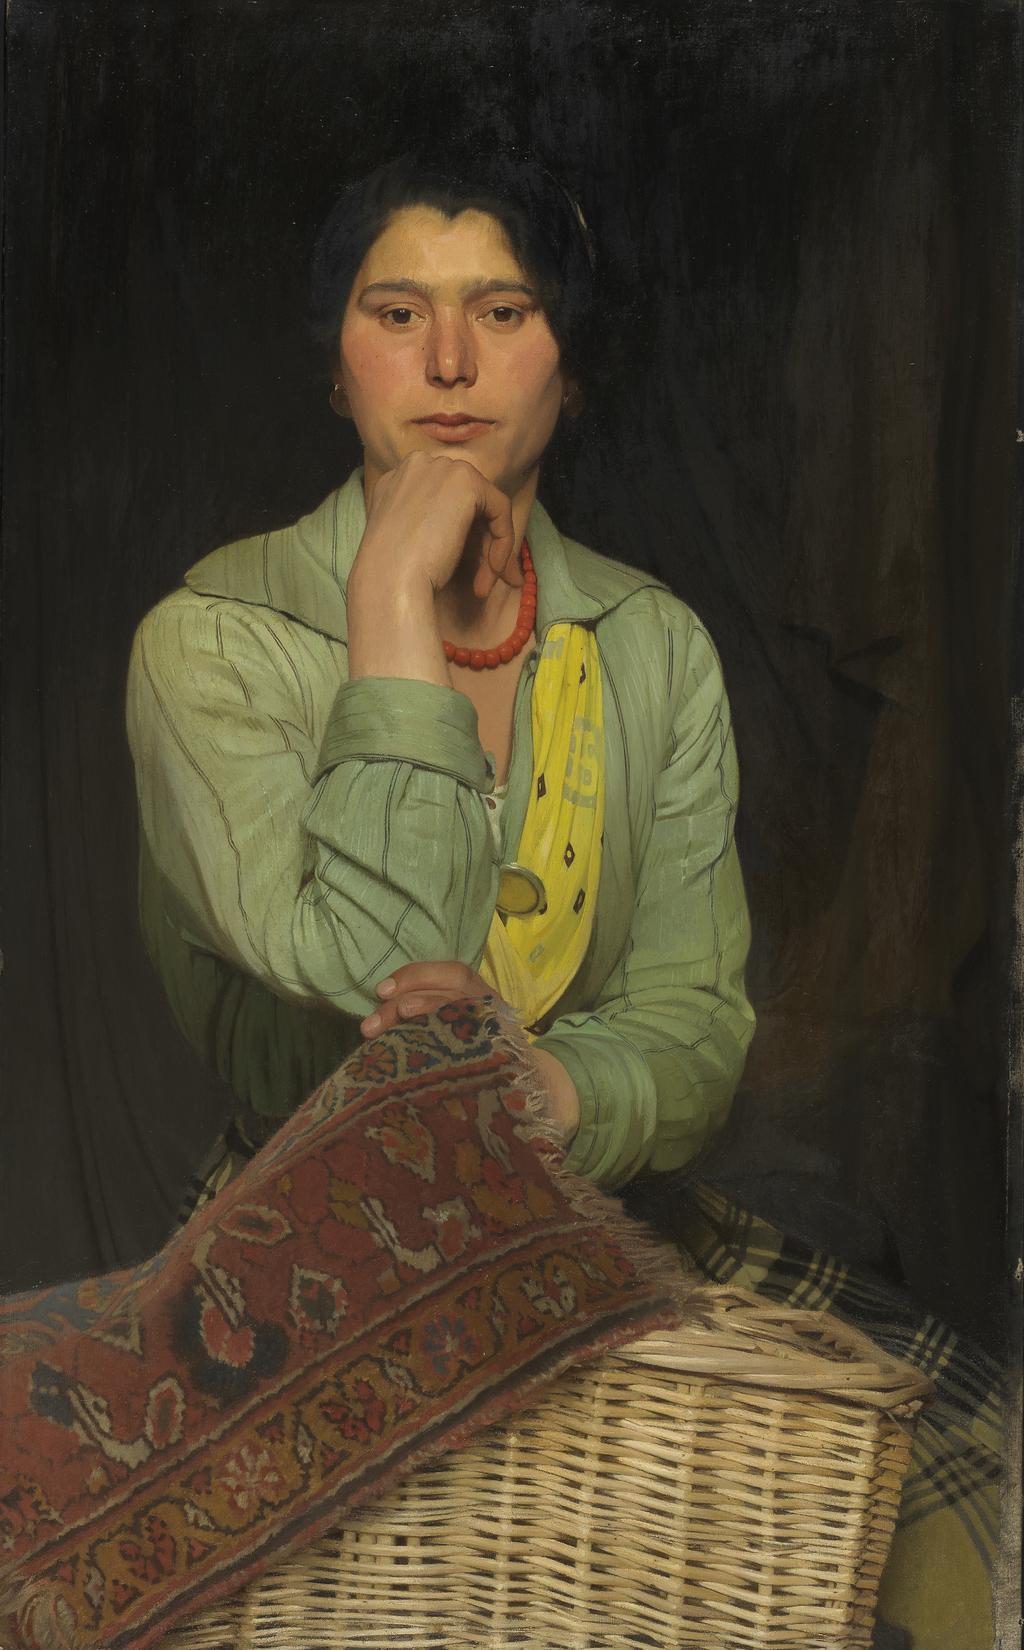 An image of The gipsy. Beeton, Alan (British, 1880-1942). Oil on canvas, height, canvas, 92.7 cm, width, canvas, 57.1 cm; height, frame, 114.8 cm, width, frame, 79.6 cm, depth, frame, 6 cm.